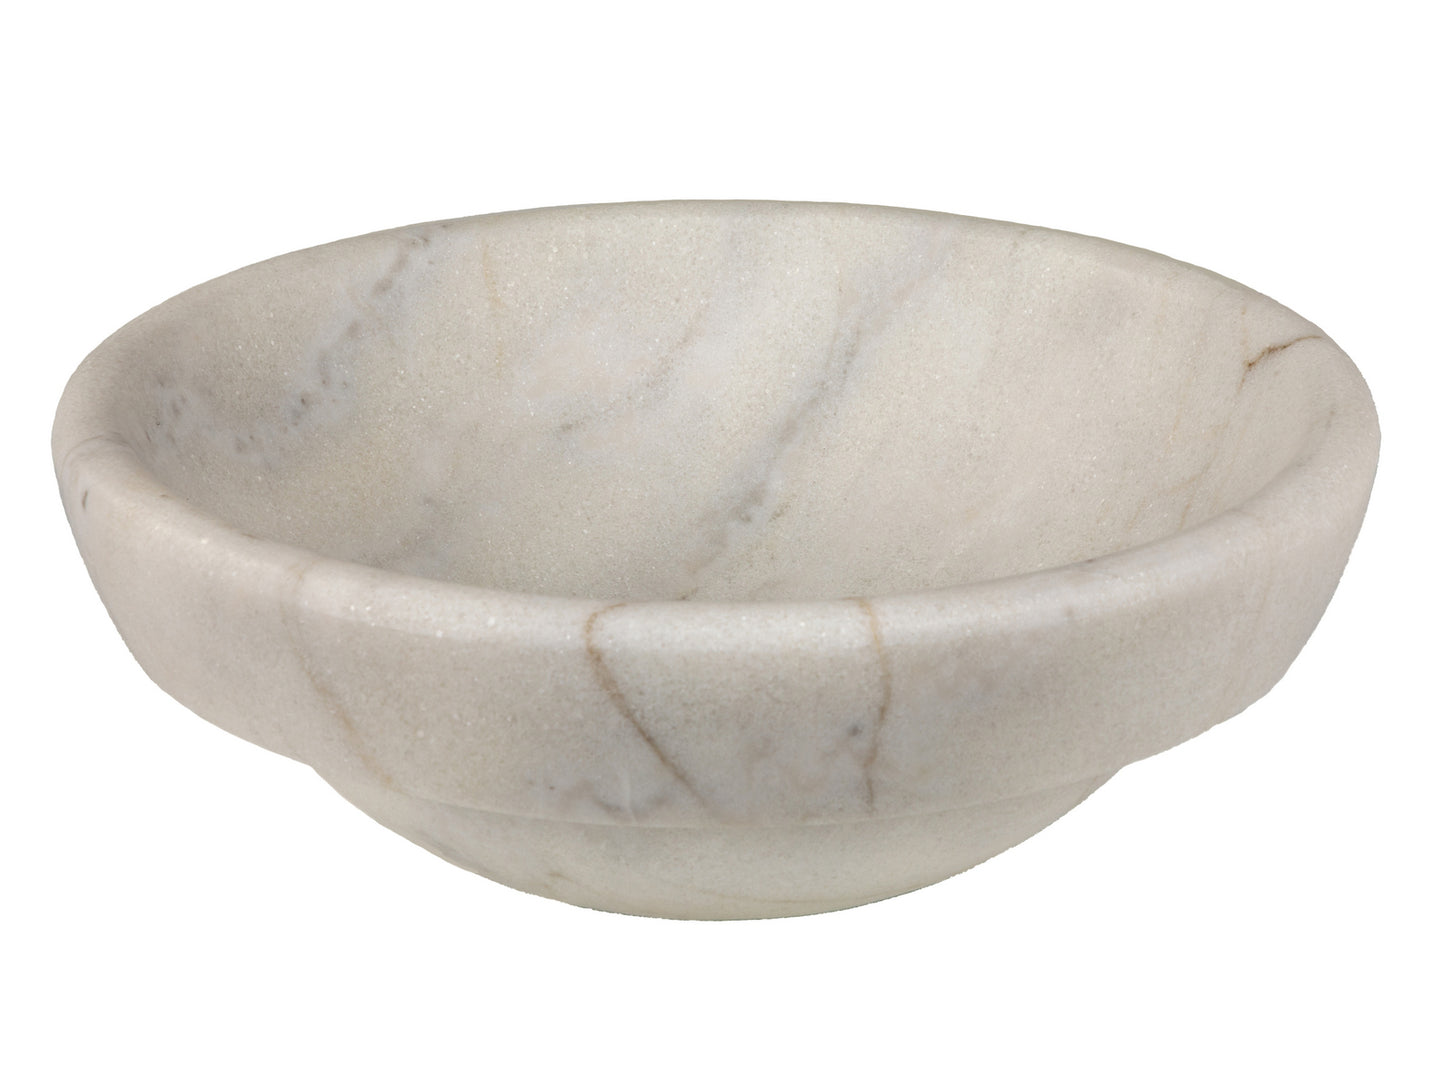 Echo Bowl Shaped Vessel Sink - Honed White Marble